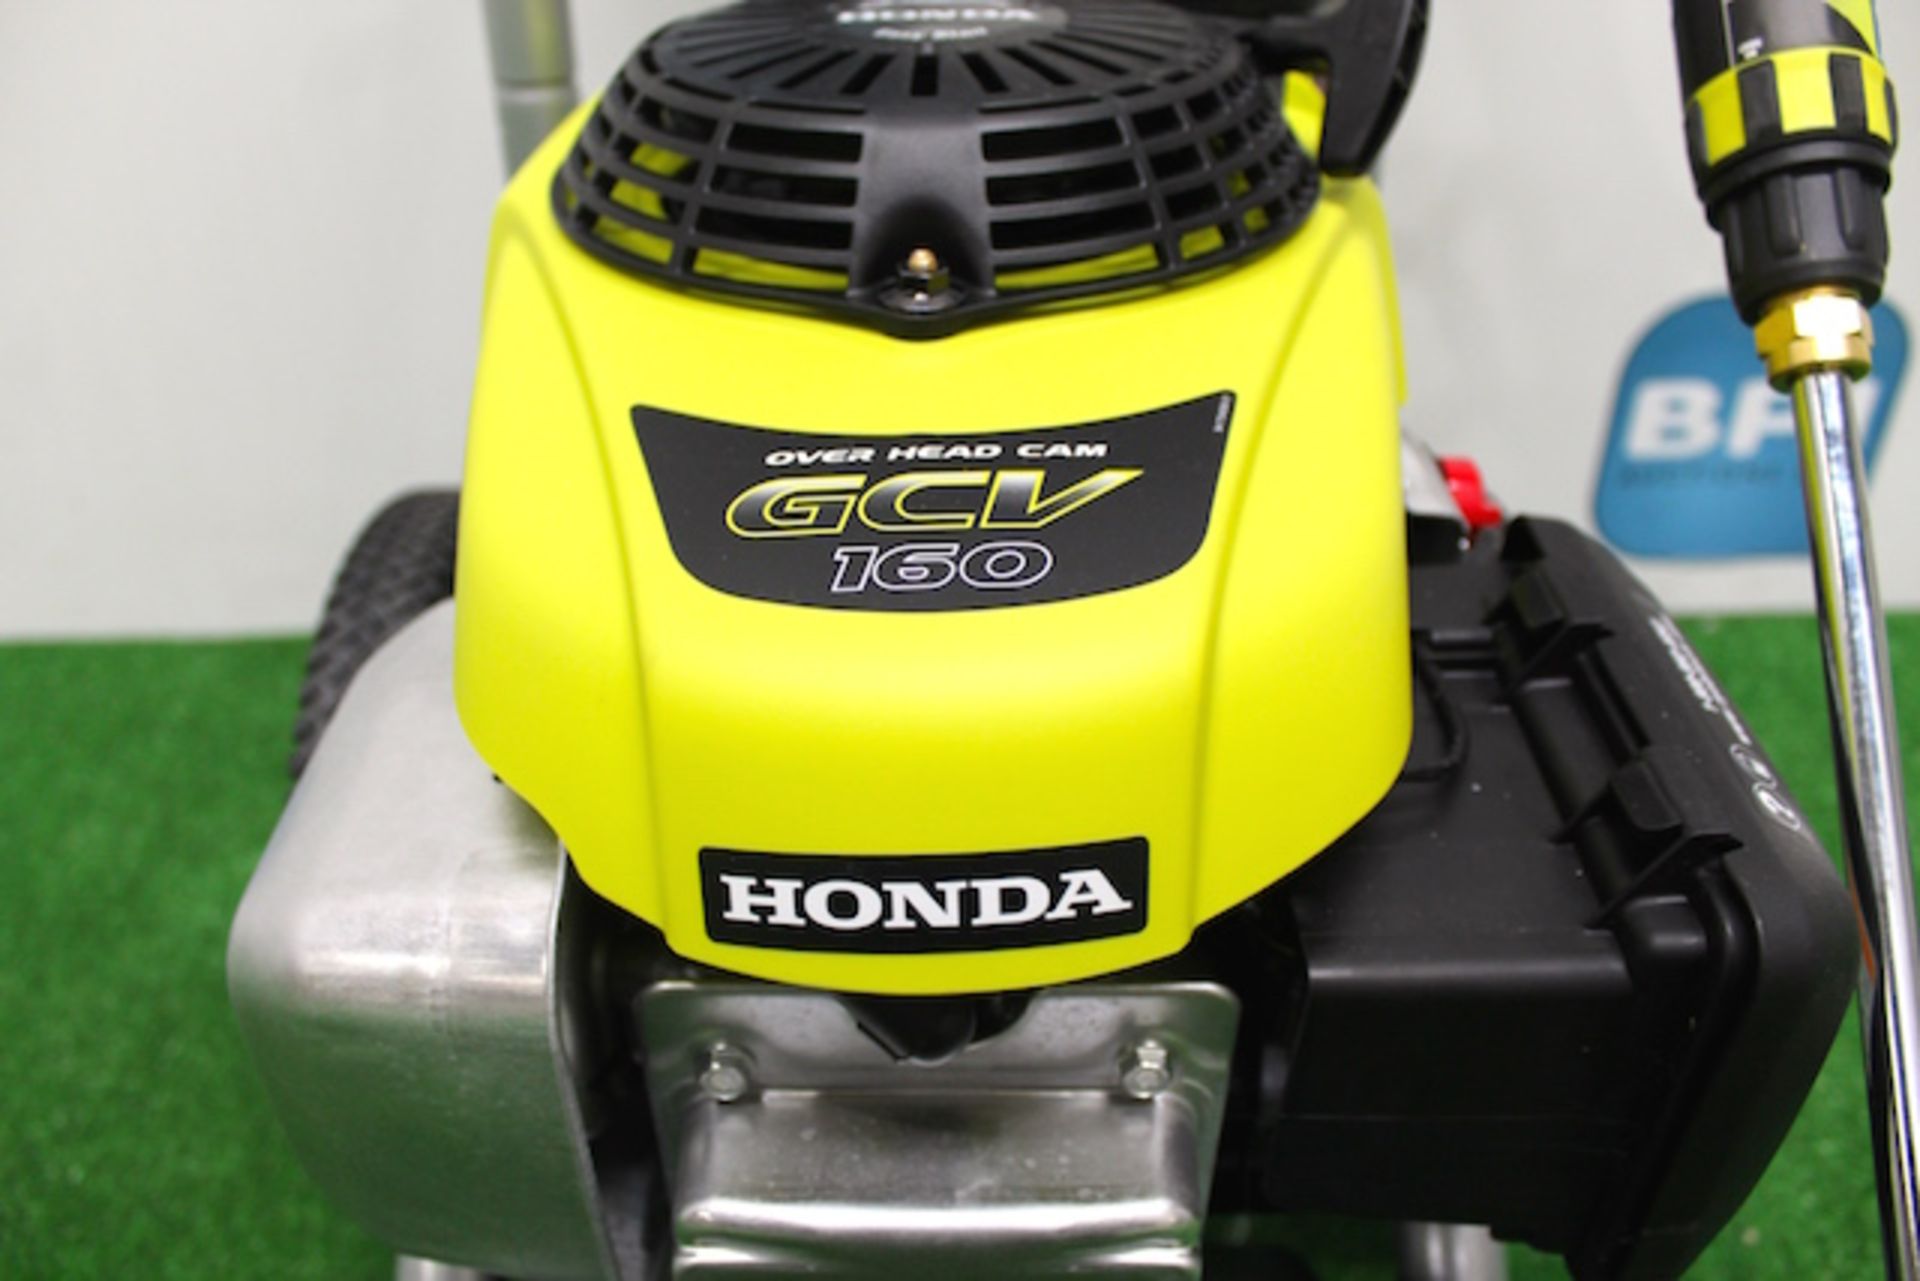 HONDA Engined 160CC Pressure Washer With Built In Soap Dispenser, 2800PSi - Image 3 of 4